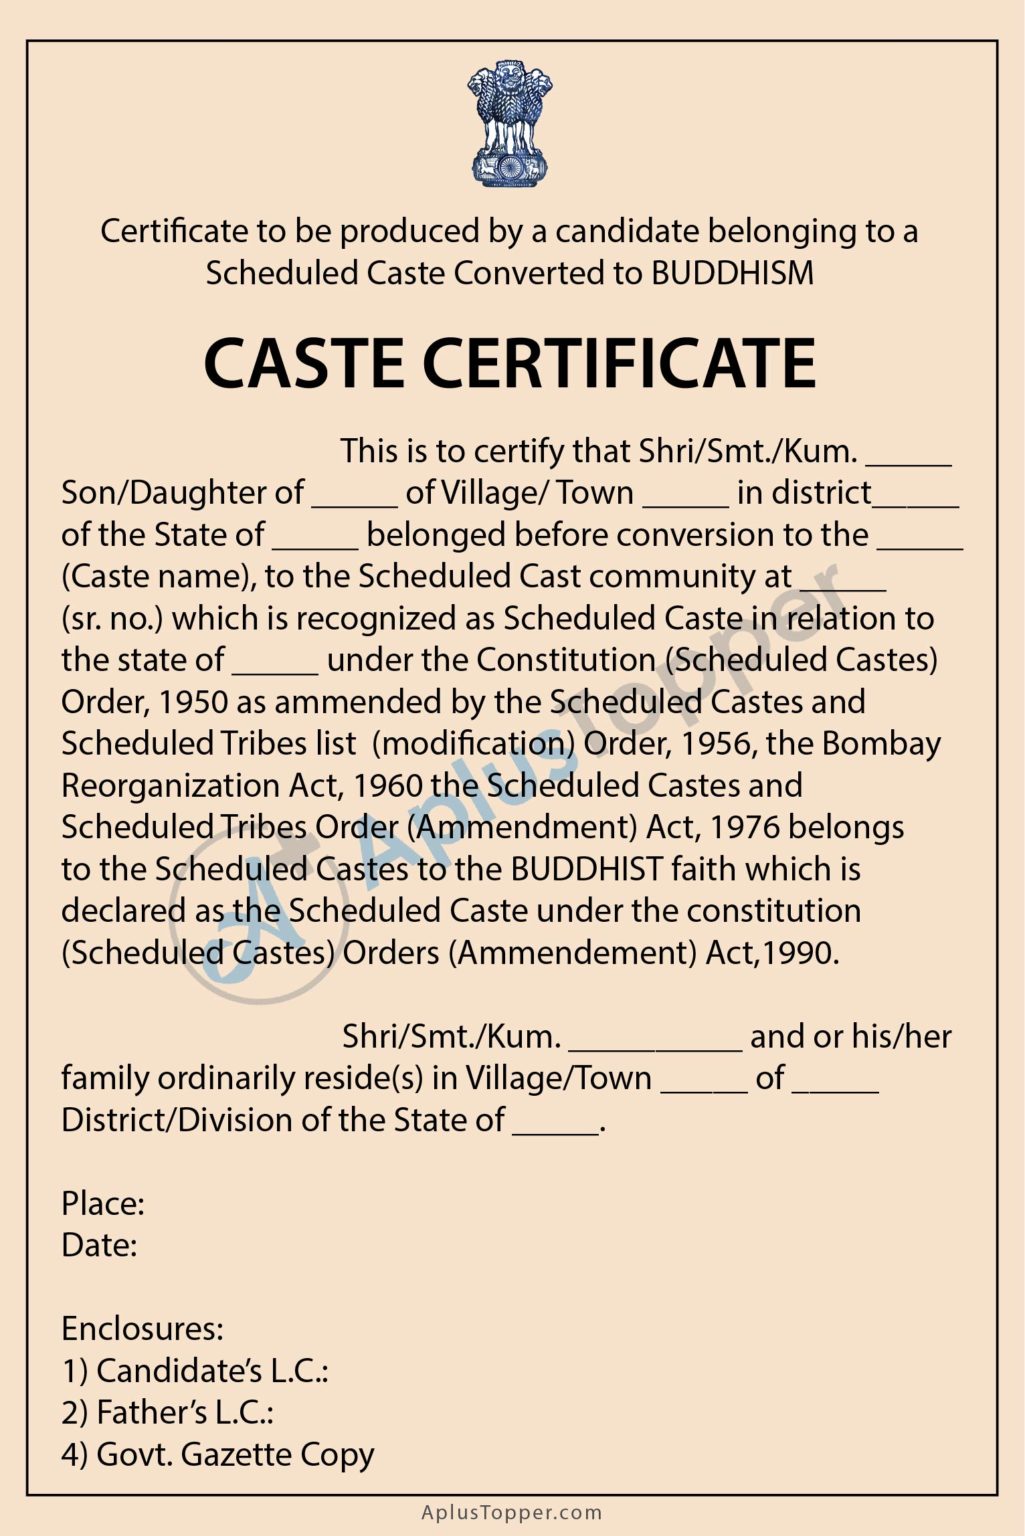 Caste Certificate Meaning, Application Process and Documents Required